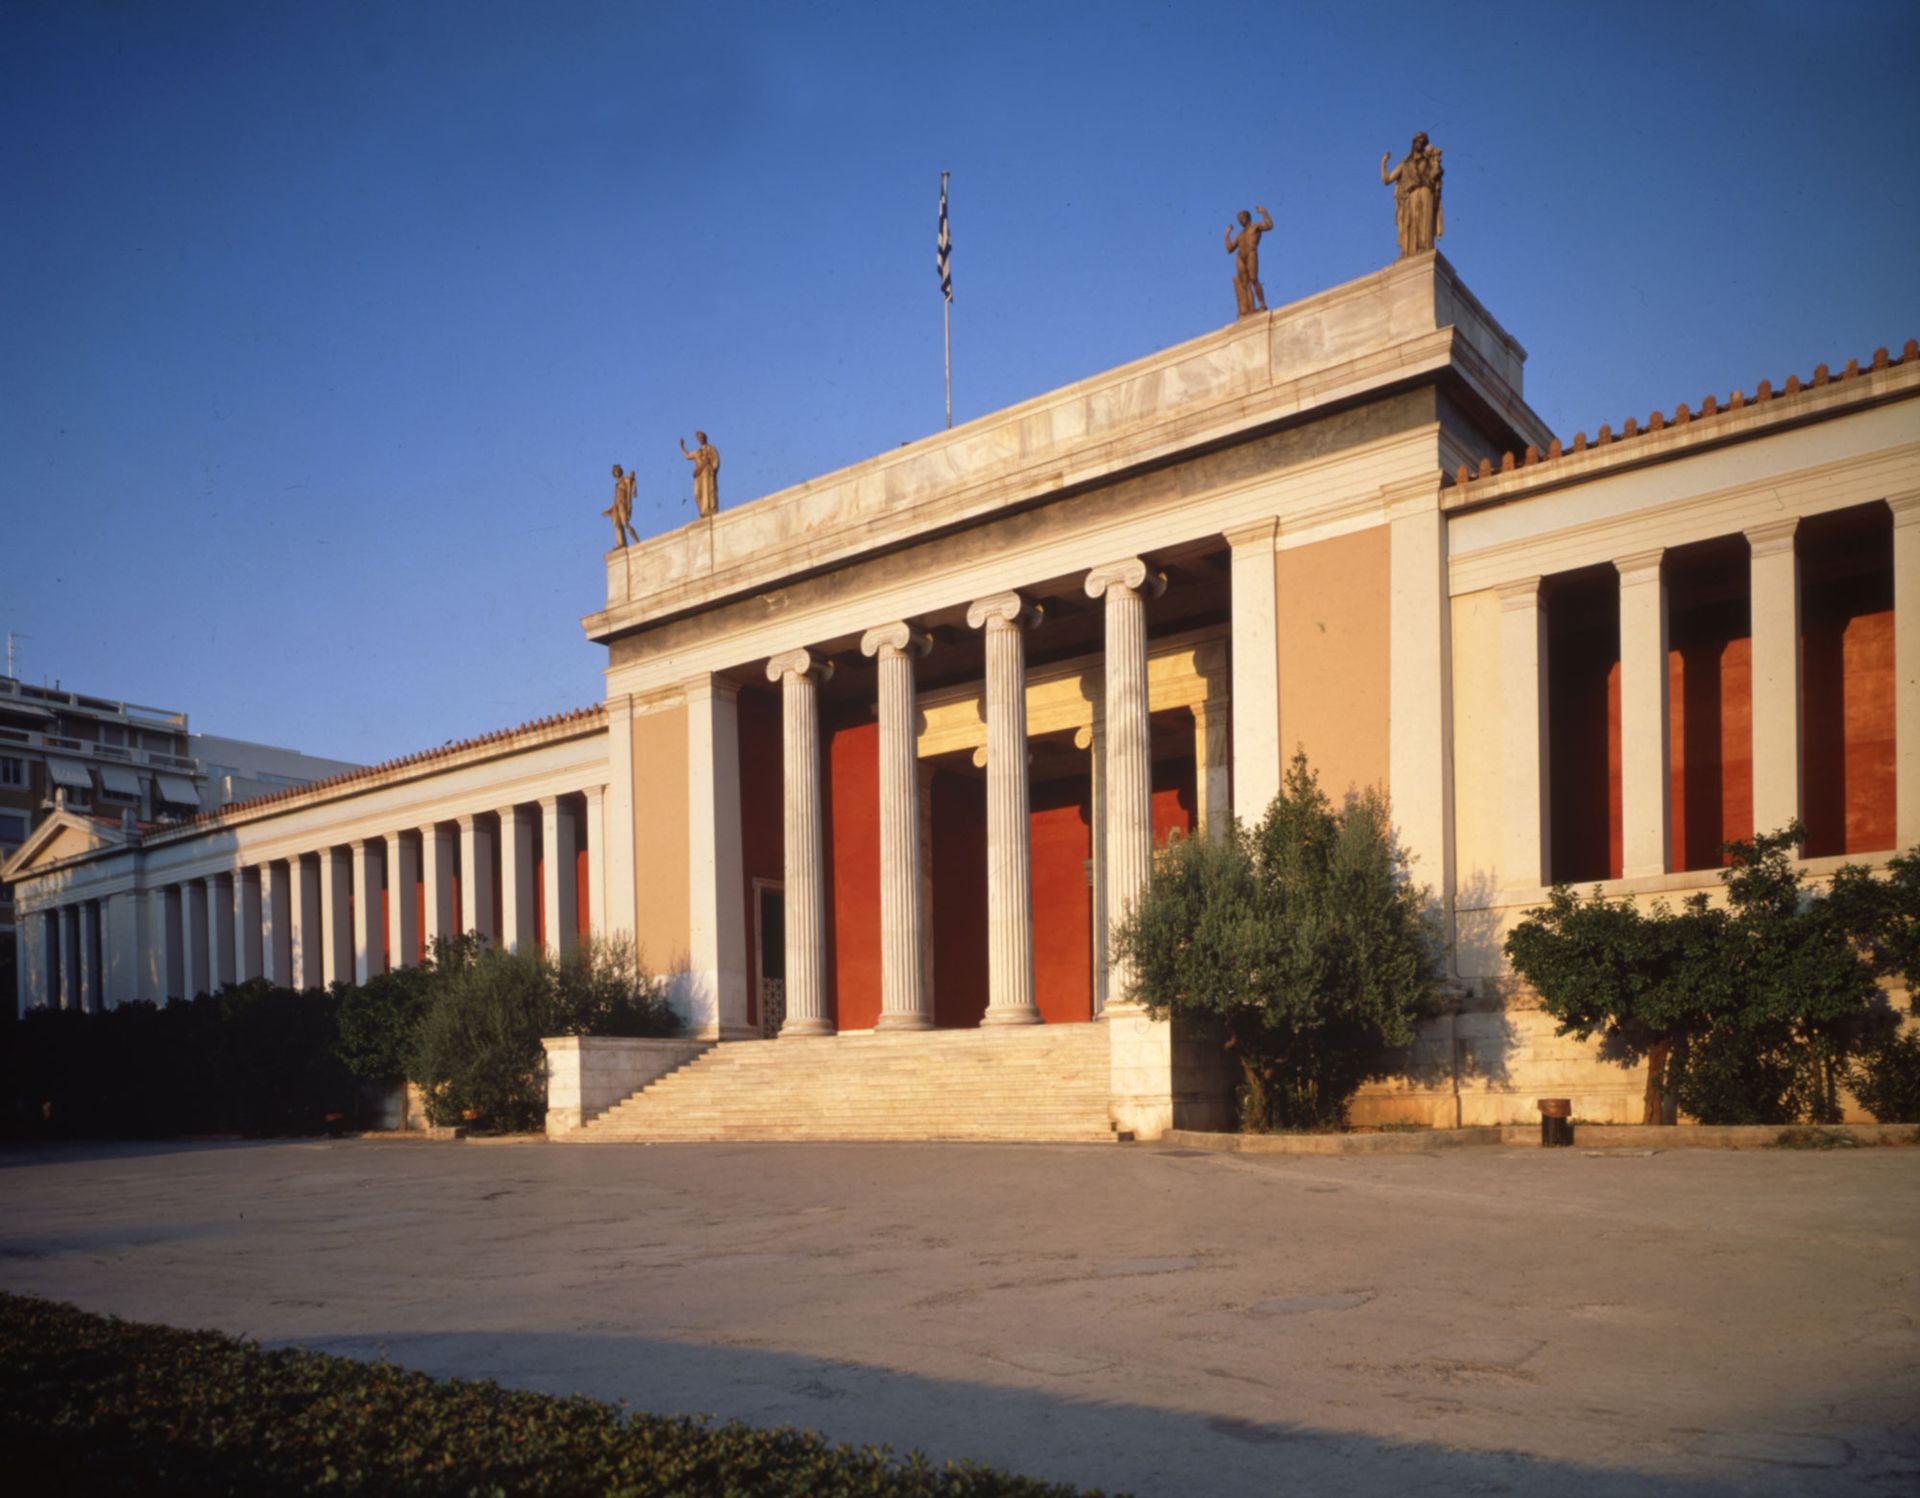 Greece's National Archaeological Museum in Athens would be given independent legal status from the state archaeological service if a proposed government bill is passed Photo: National Archaeological Museum, Ministry of Culture and Sports